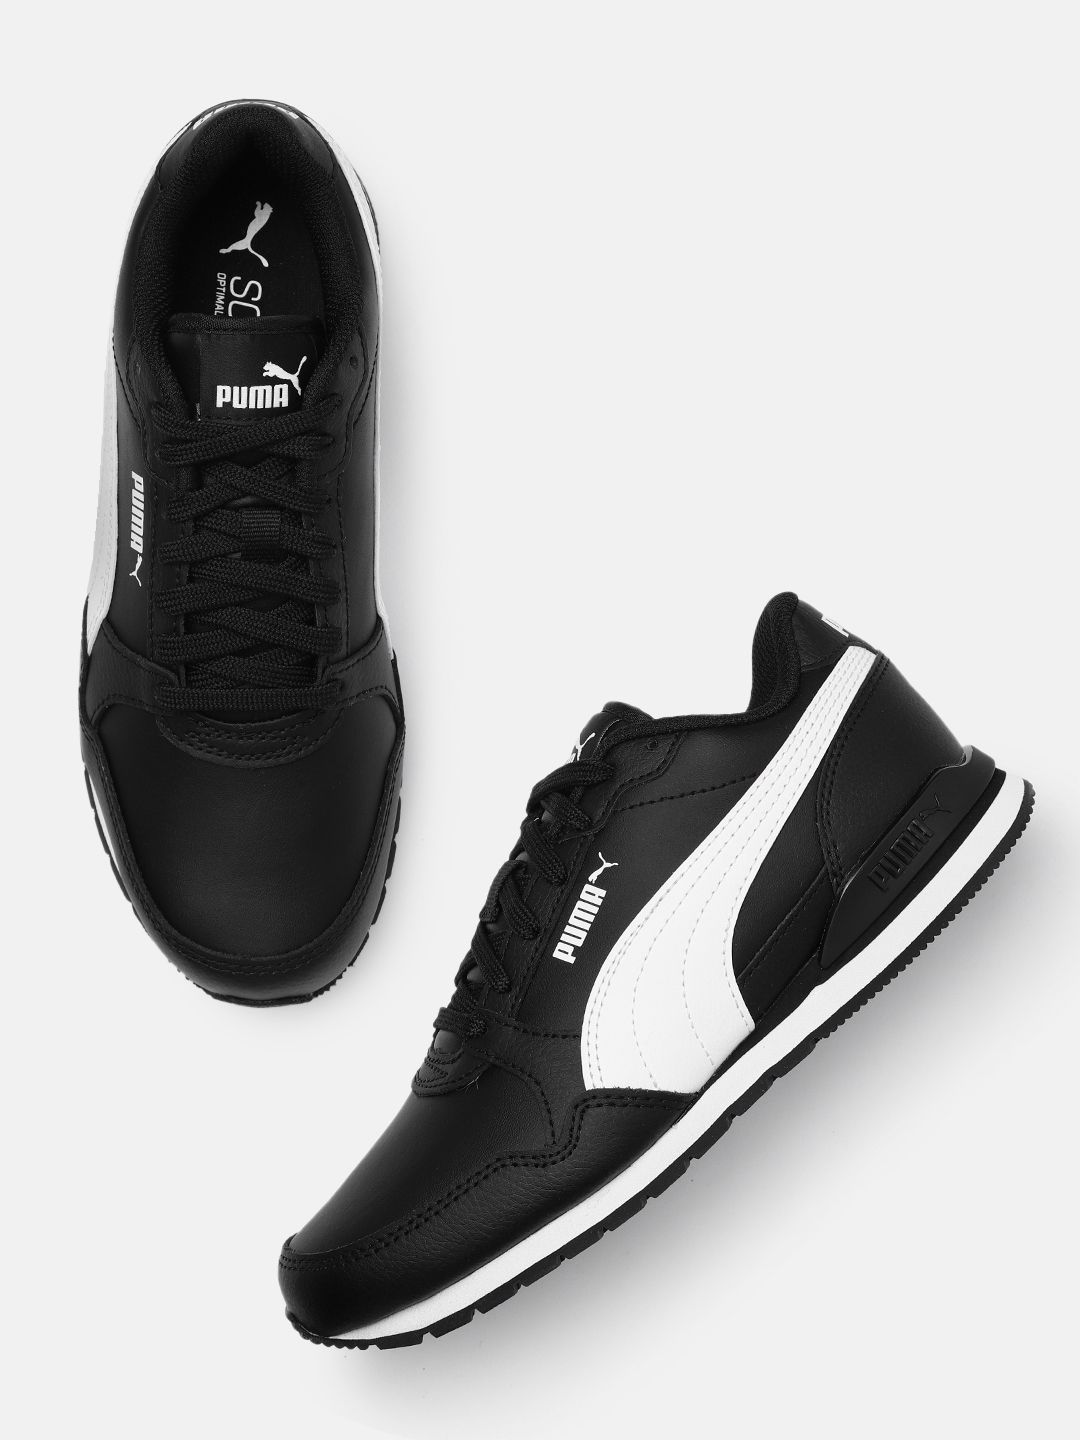 Puma Unisex Black Solid Regular ST Runner v3 L Casual Sneakers Price in India